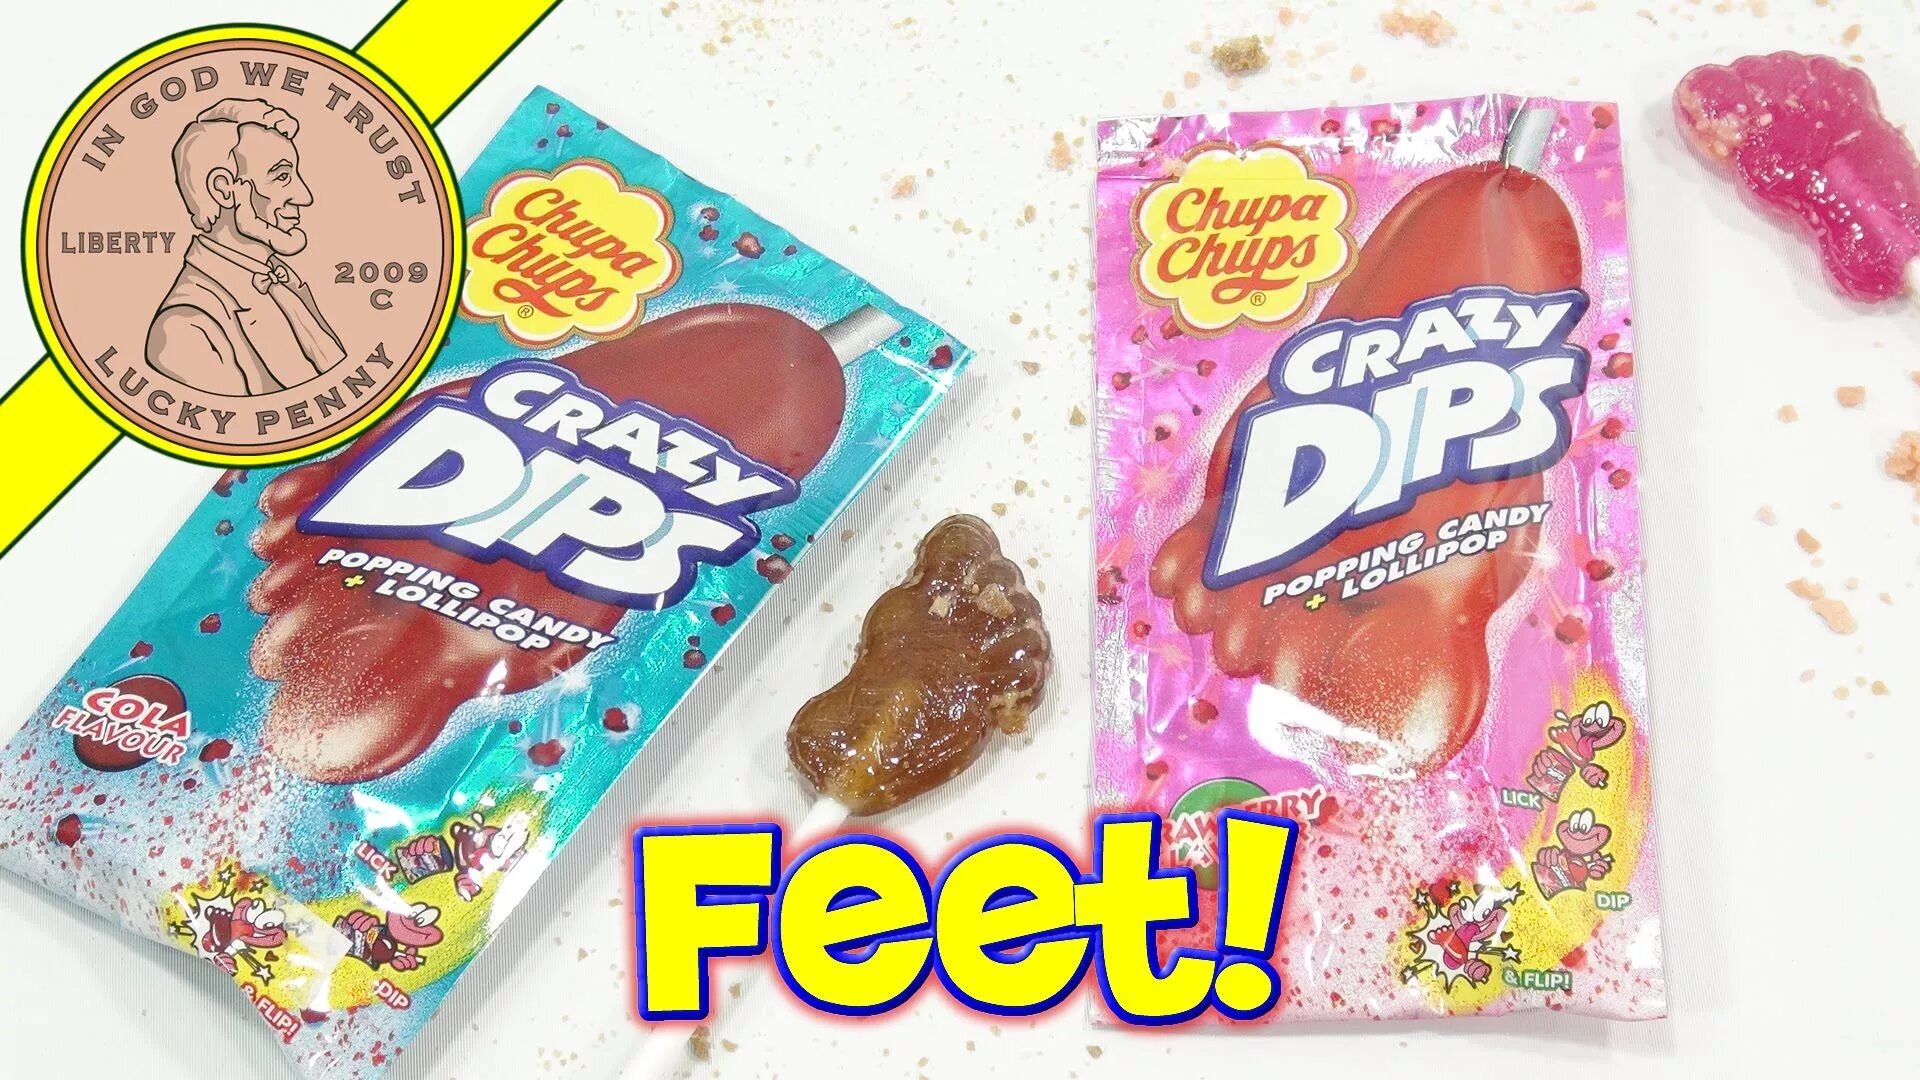 Chupa chups Crazy Dips. Candy chups. Popping Candy. Игра Чупа Чупс.